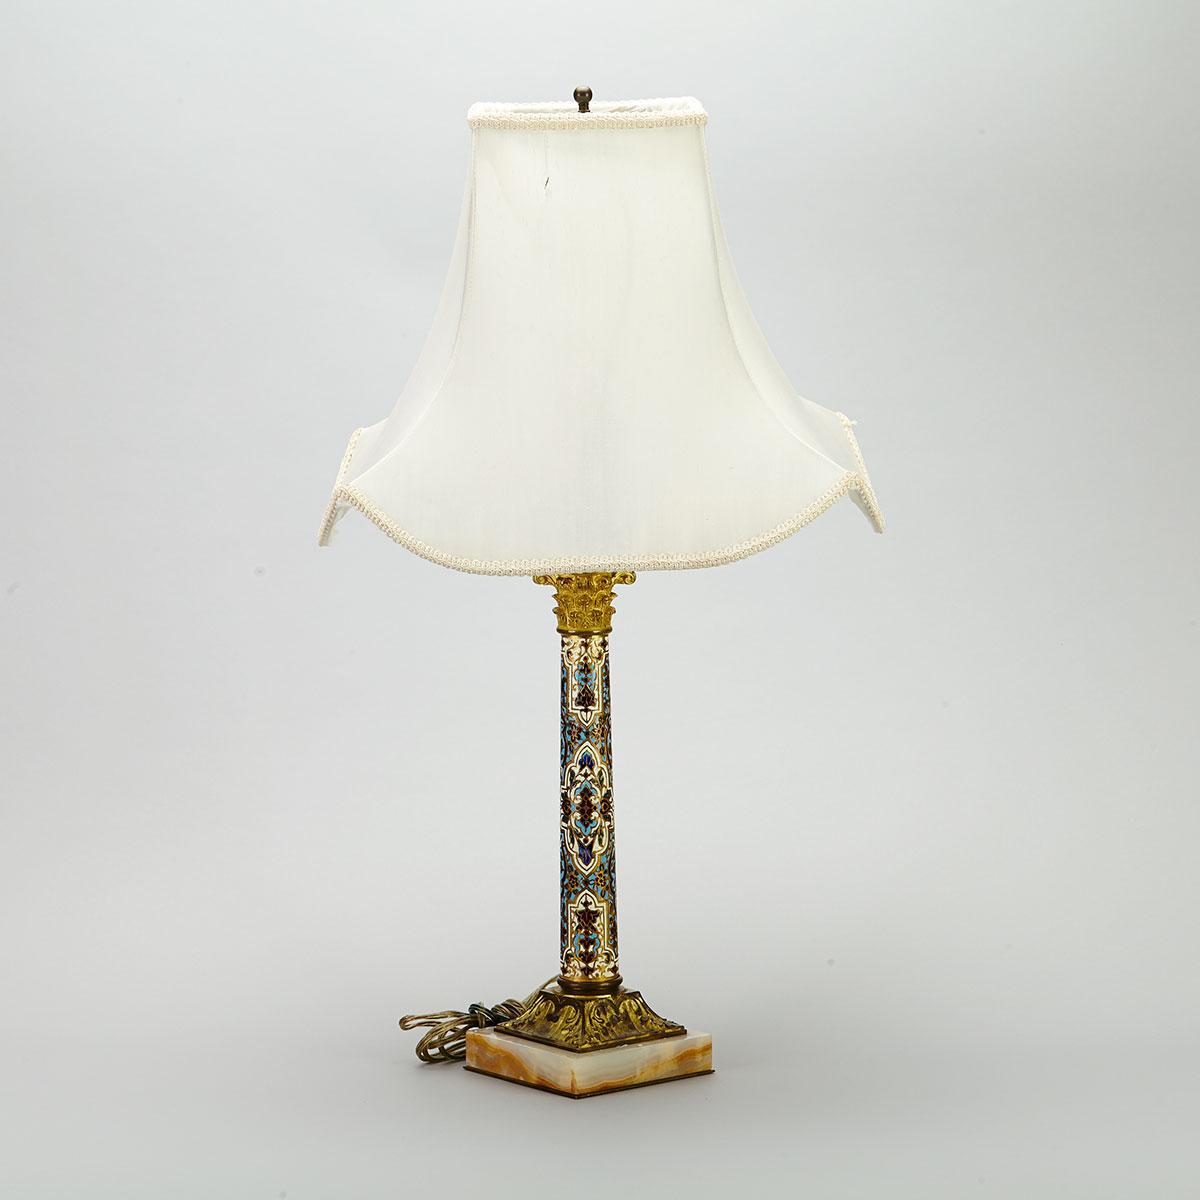 French Ormolu Mounted Champleve Enamelled Column Form Table Lamp, early 20th century